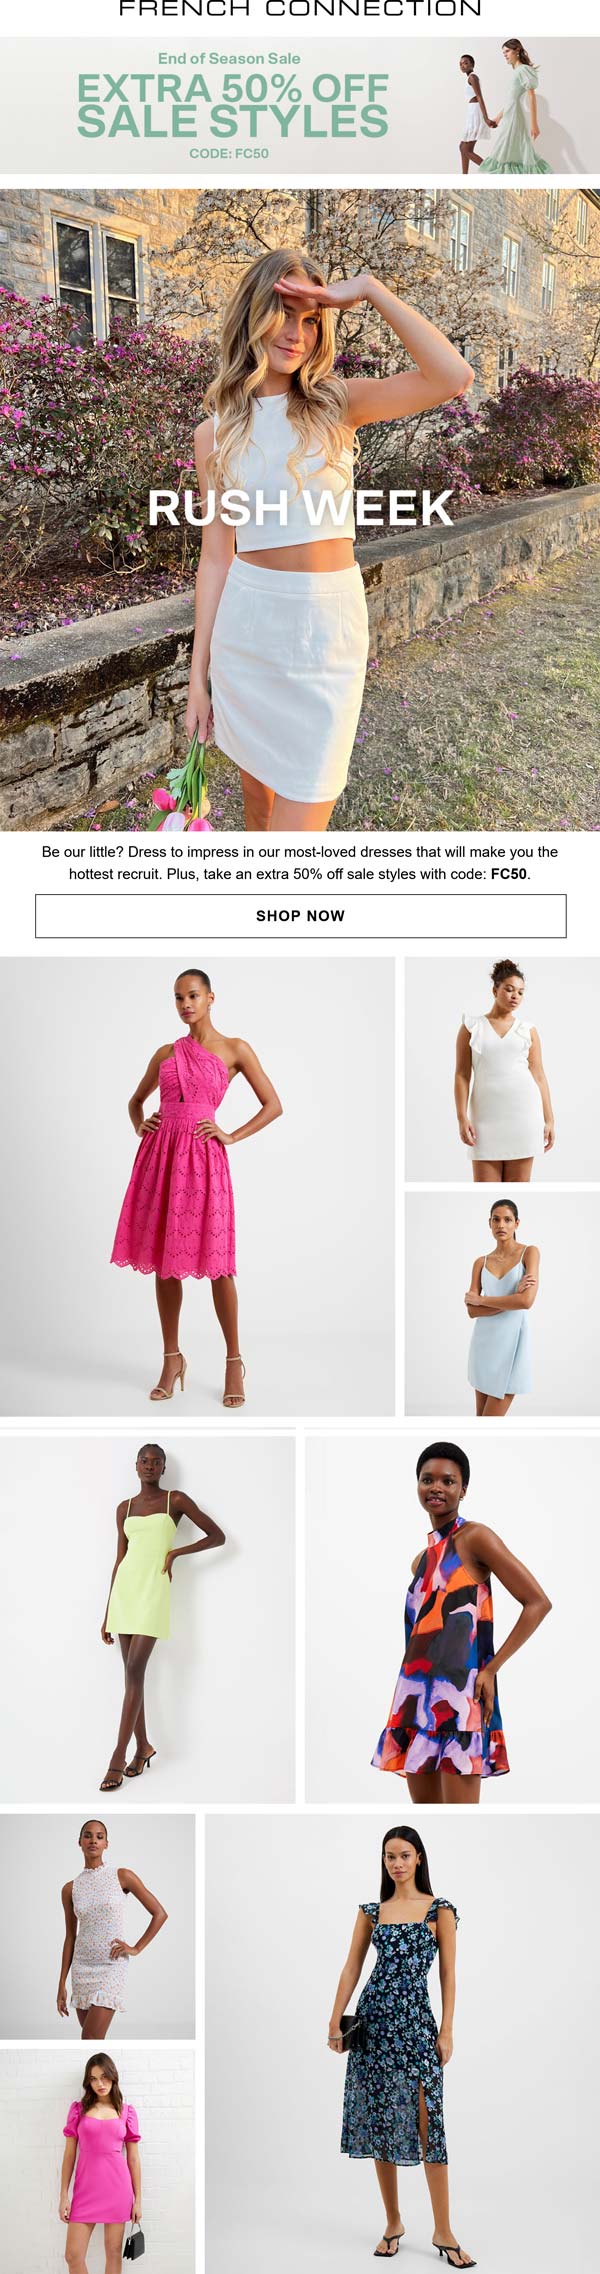 French Connection stores Coupon  Extra 50% off sale styles at French Connection via promo code FC50 #frenchconnection 